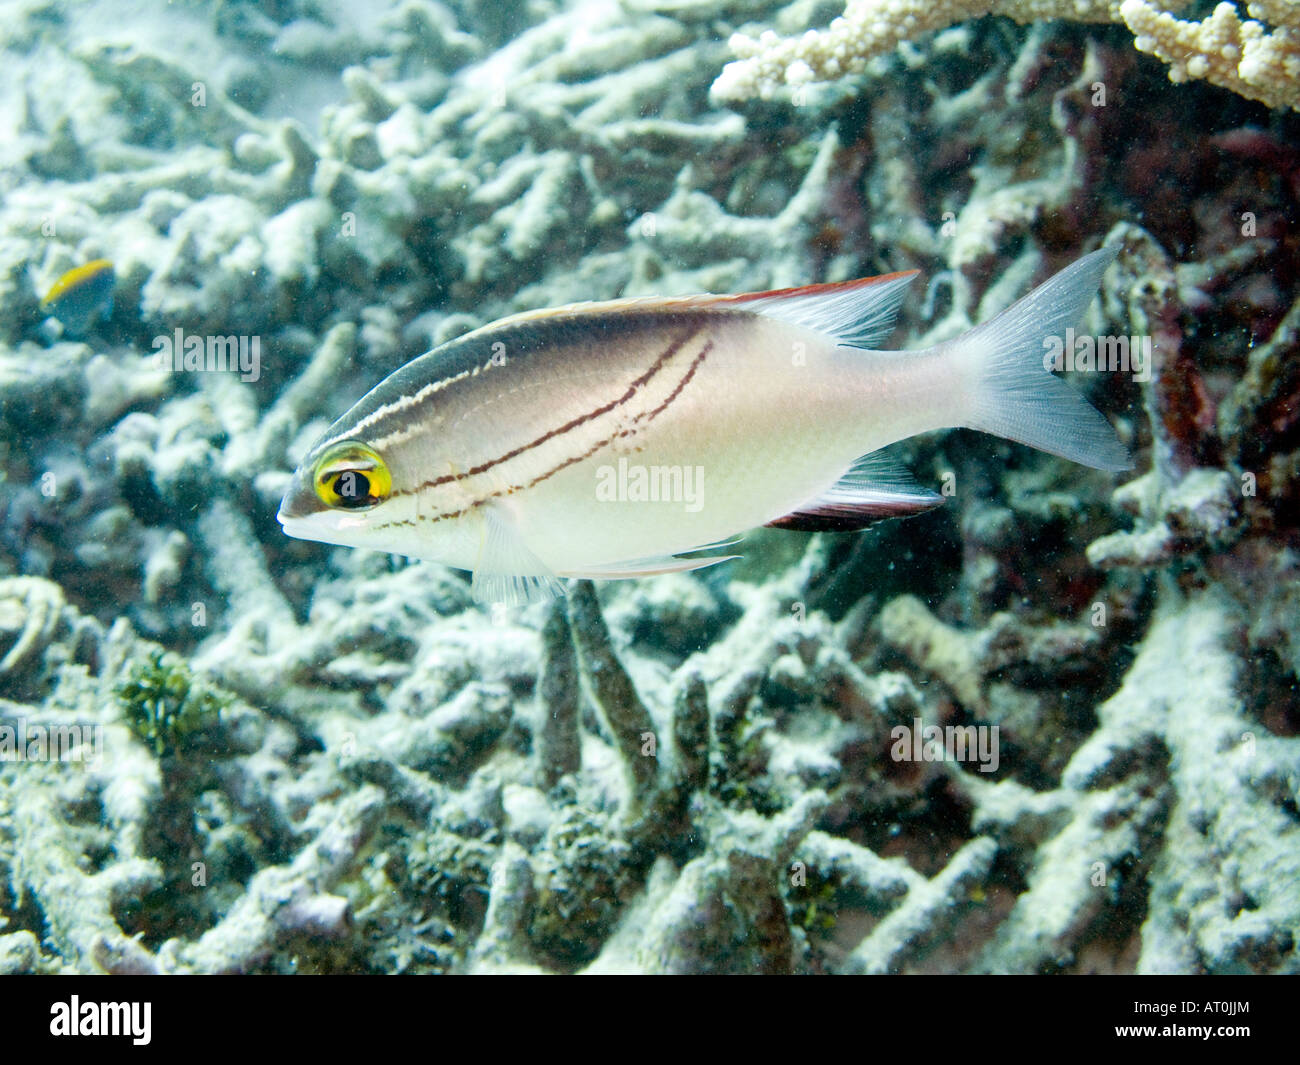 Twoline spinecheek fish, Scolopsis trilineatus against coral rubble January 2008, Similan islands, Andaman sea, Thailand Stock Photo